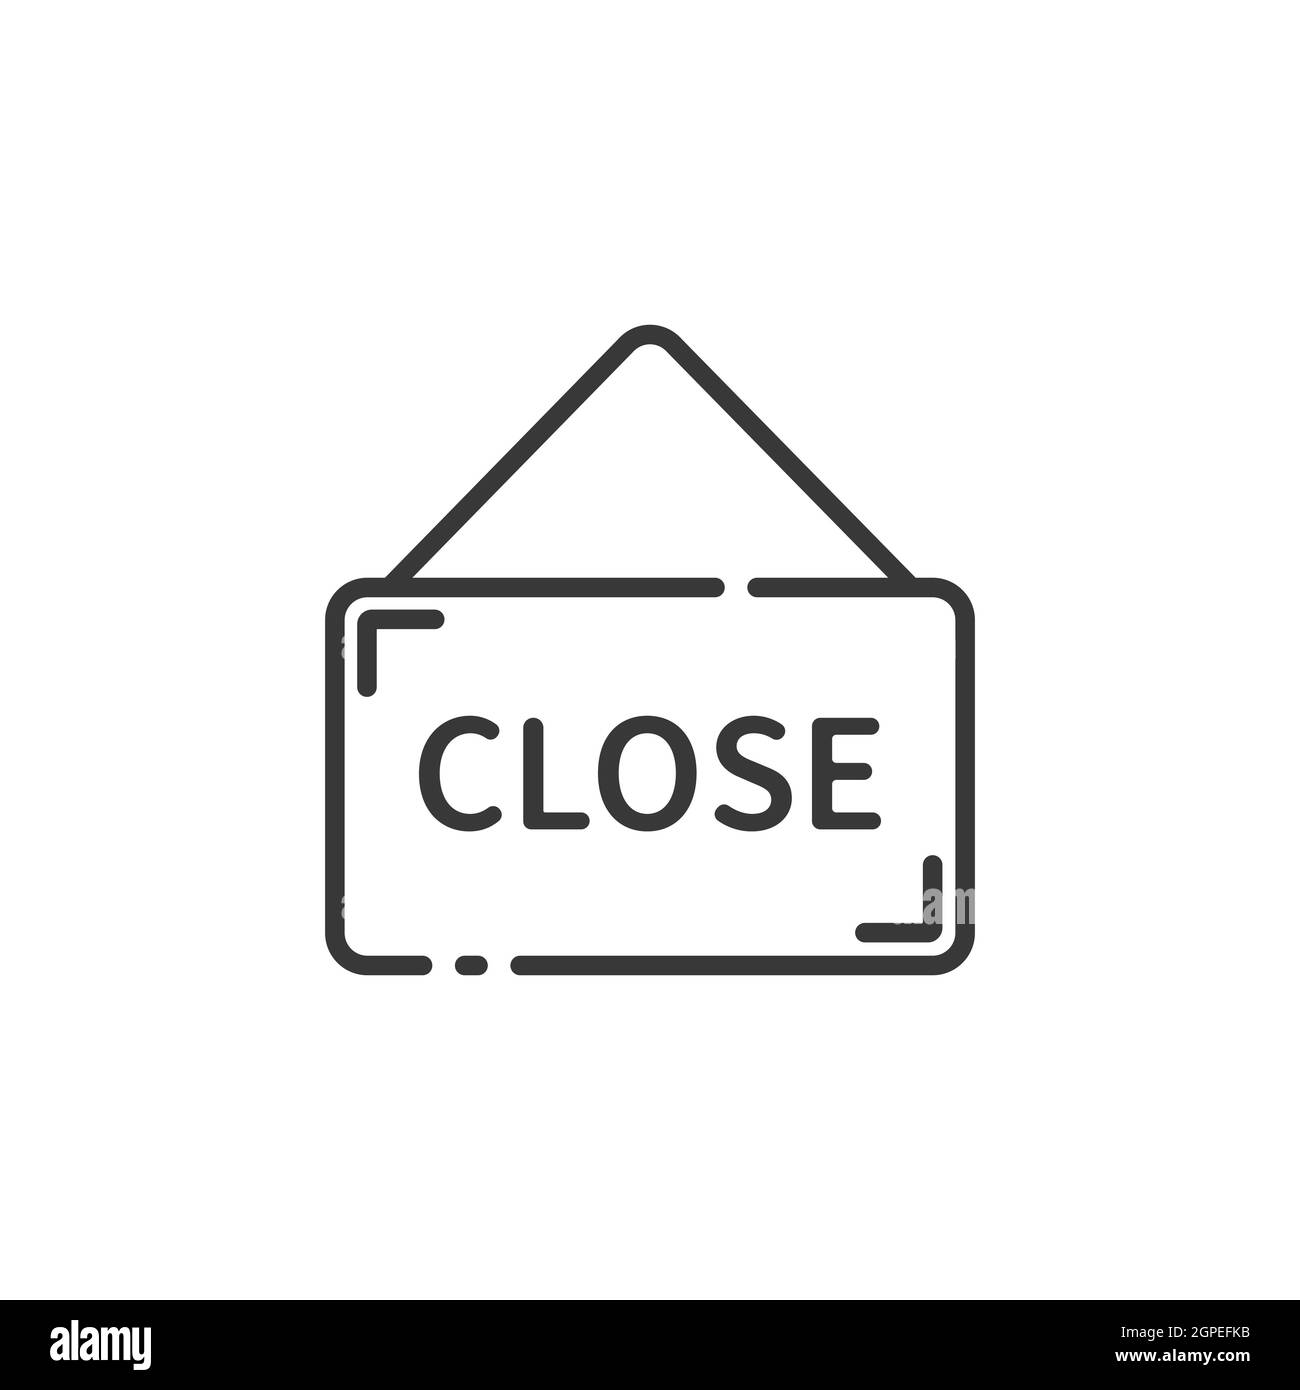 Close notice thin line icon. Label with text. Outline commerce vector illustration Stock Vector